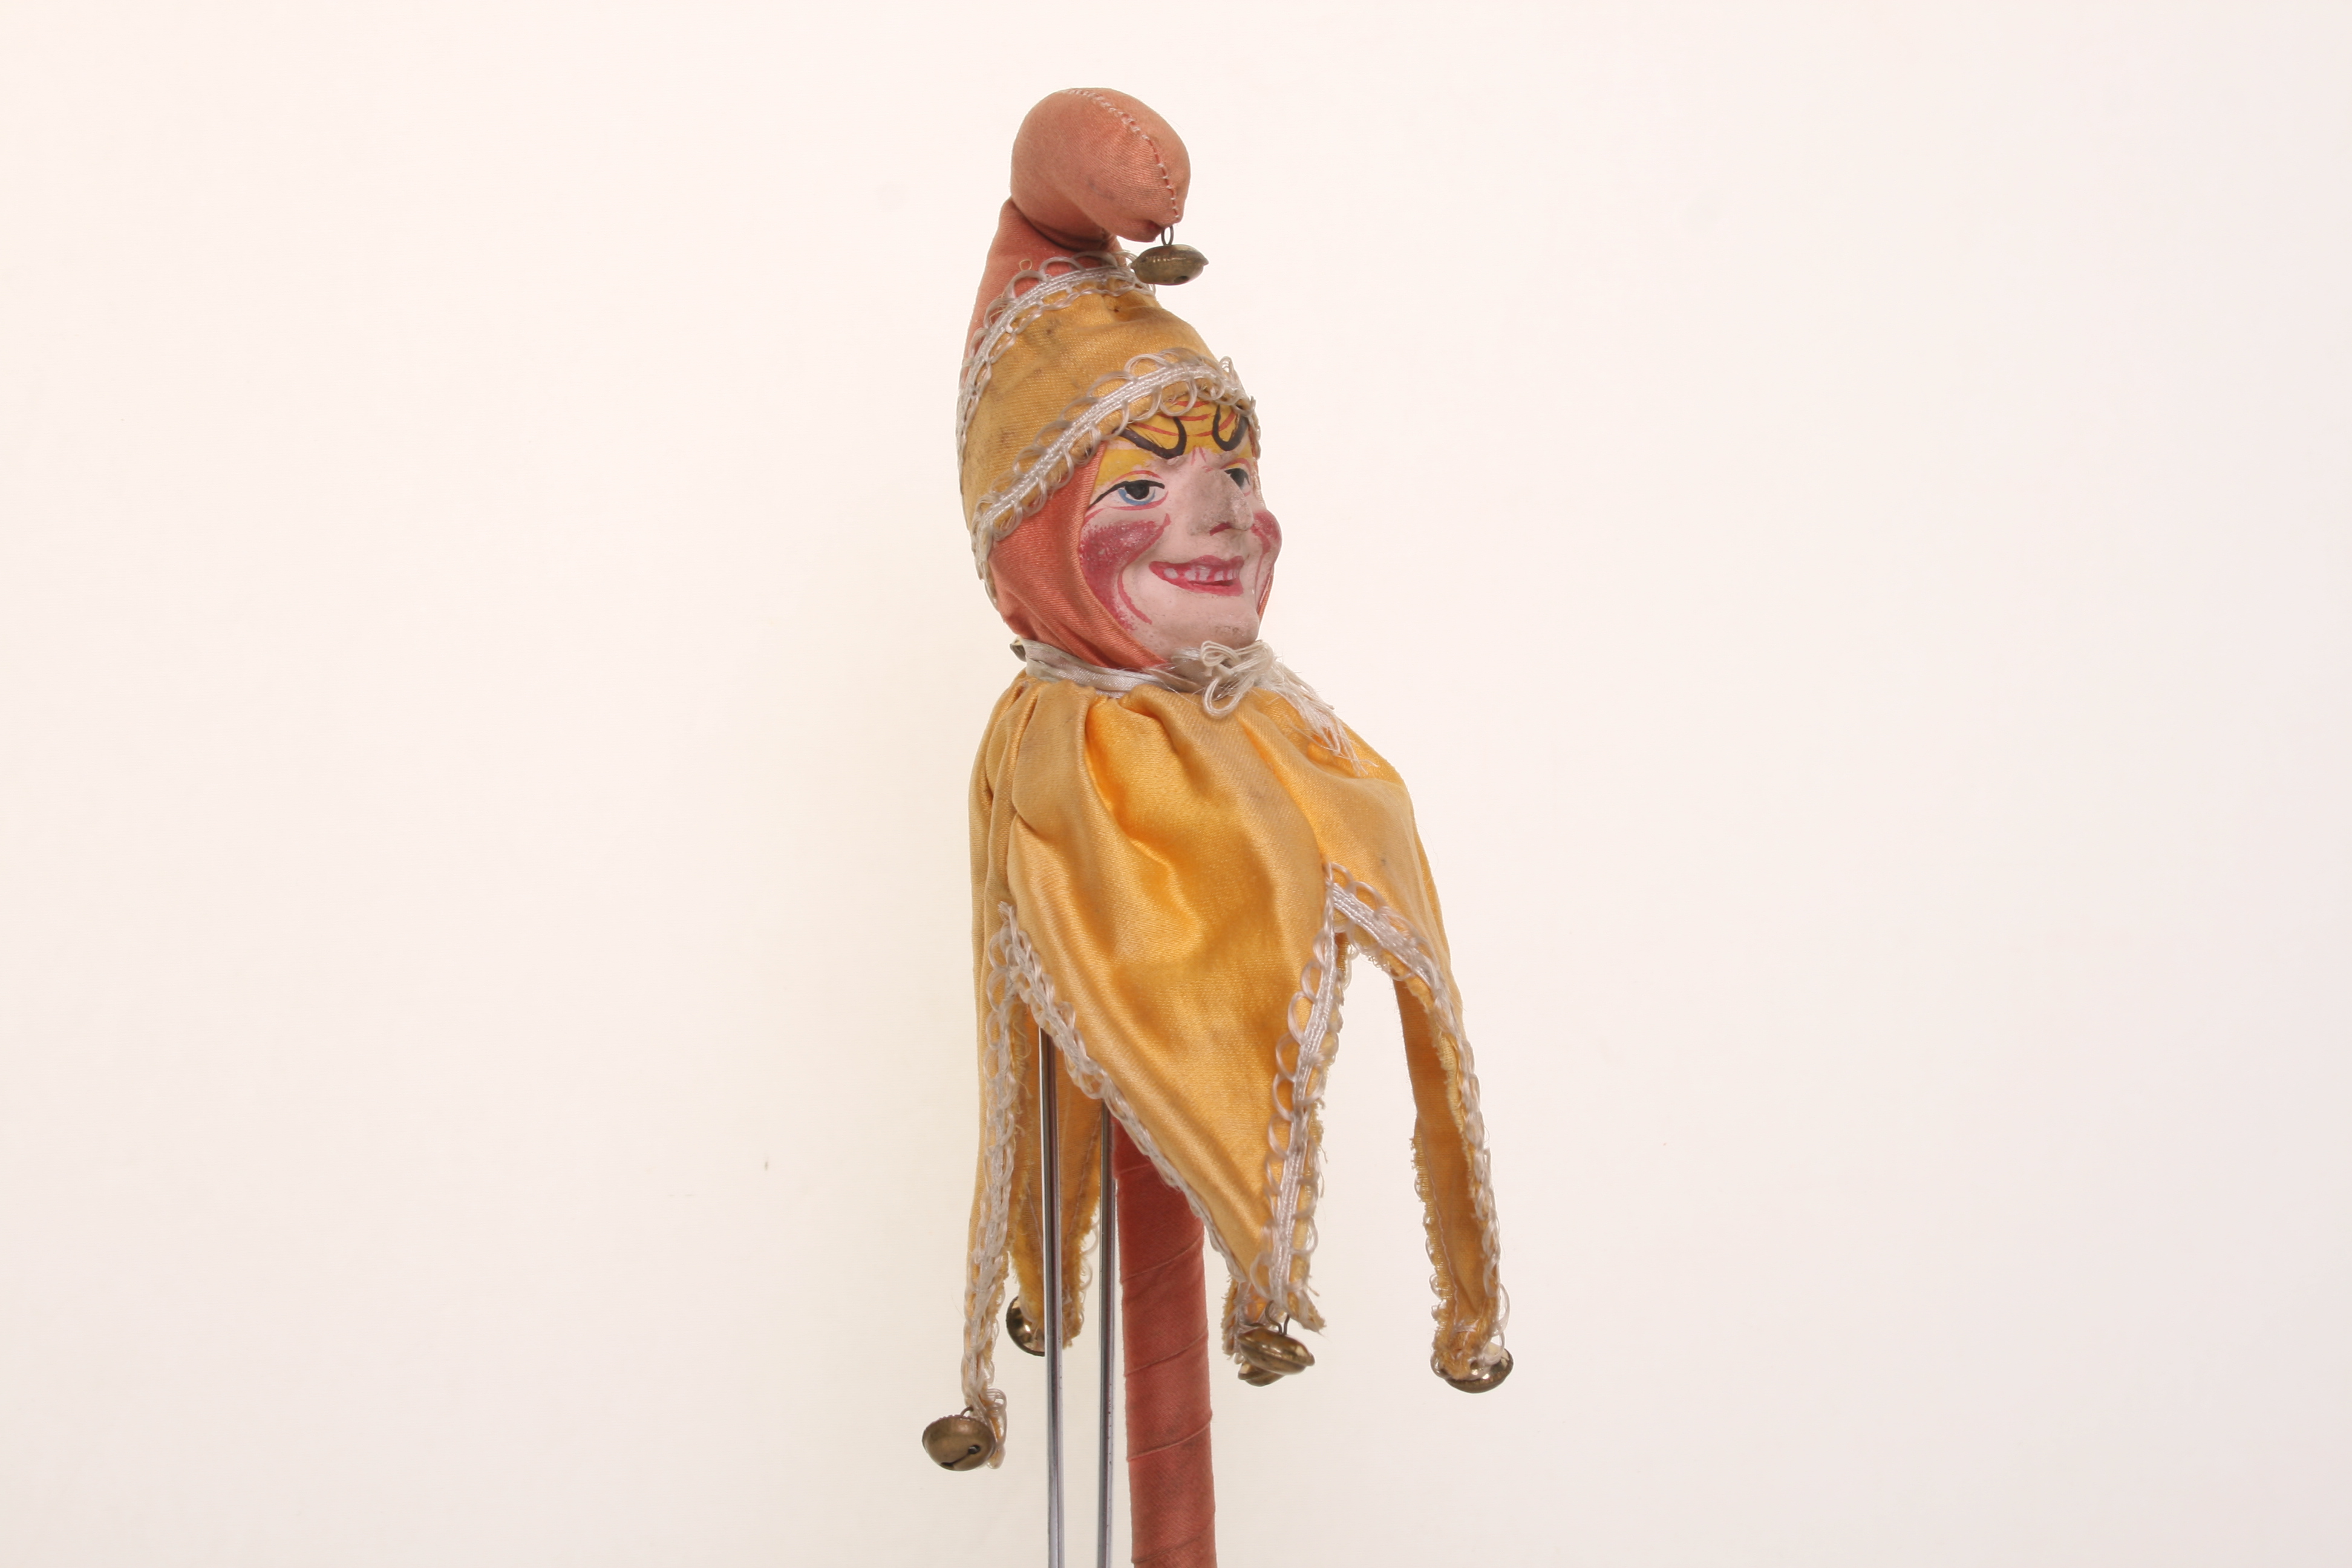 Papier-mache Punch on stick, circa 1900, with exaggerated painted features, original yellow and